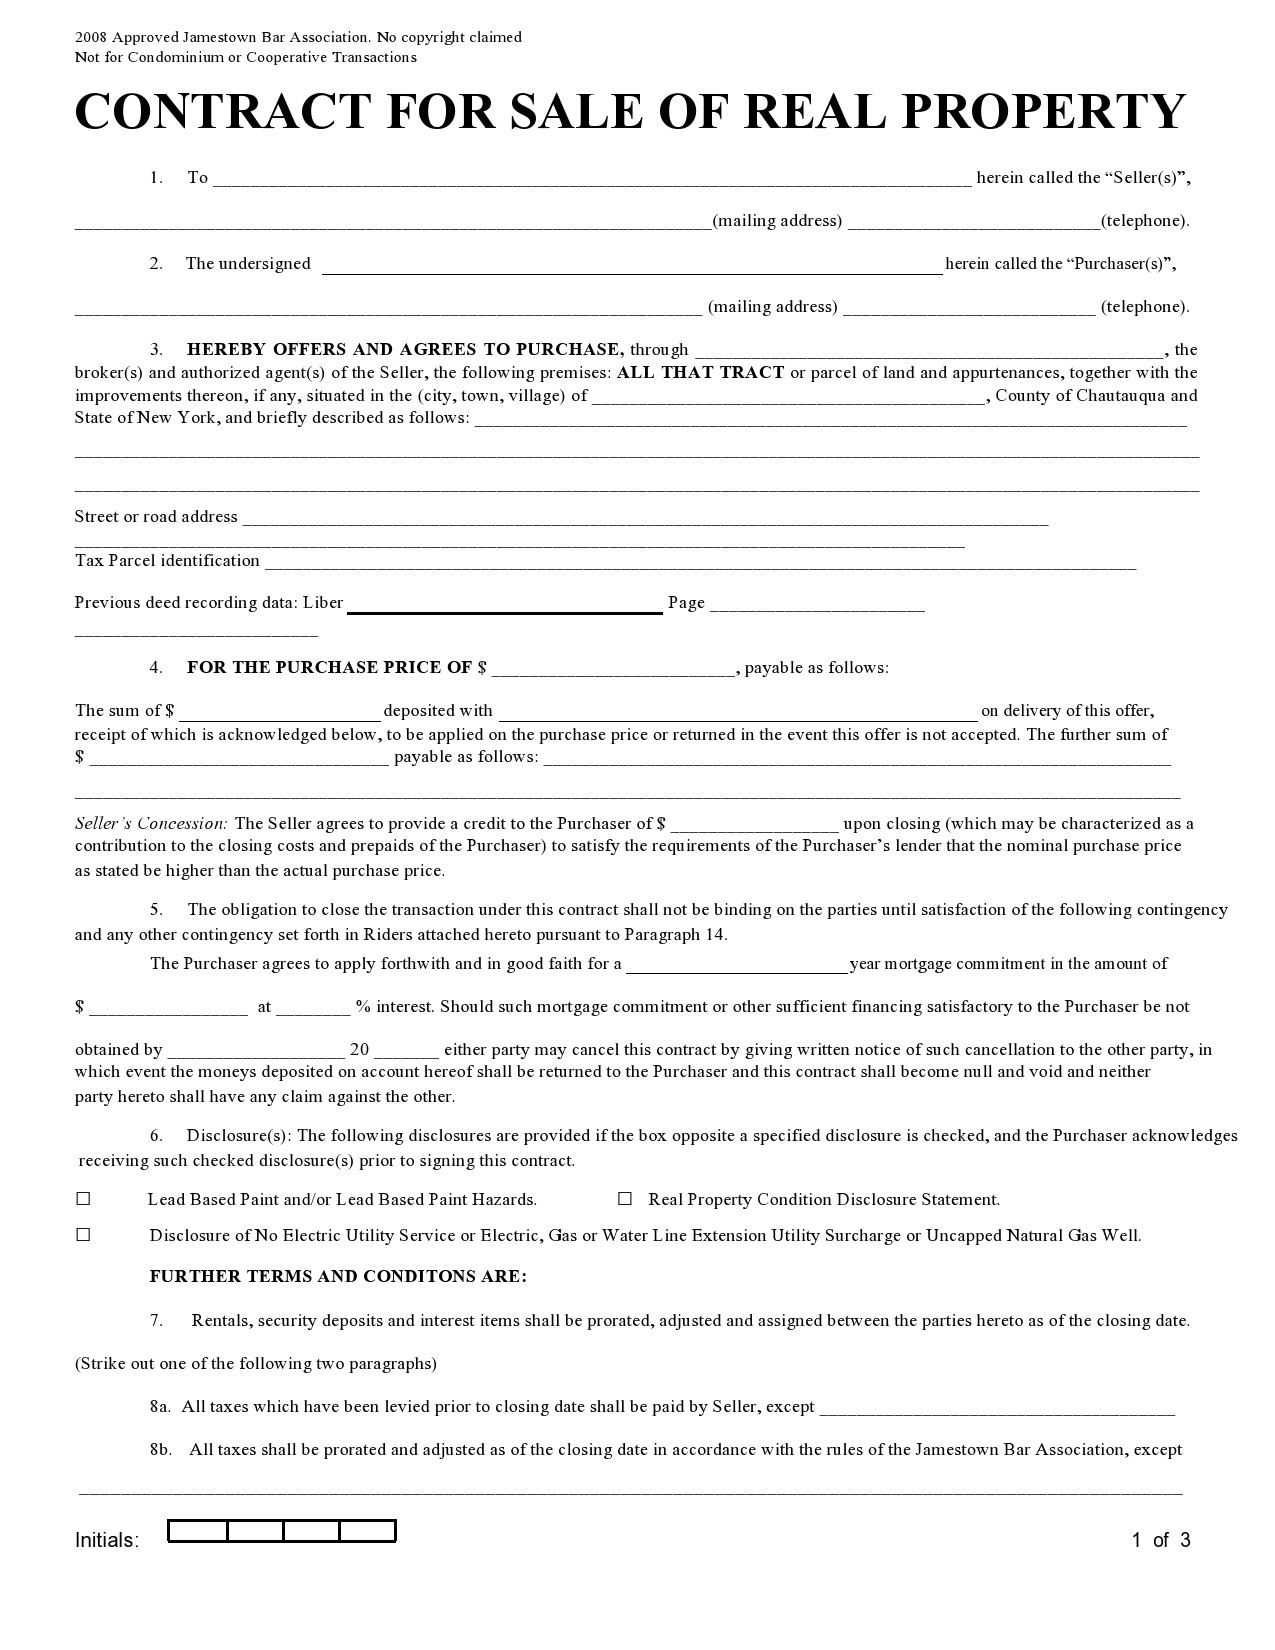 Free land contract form 44